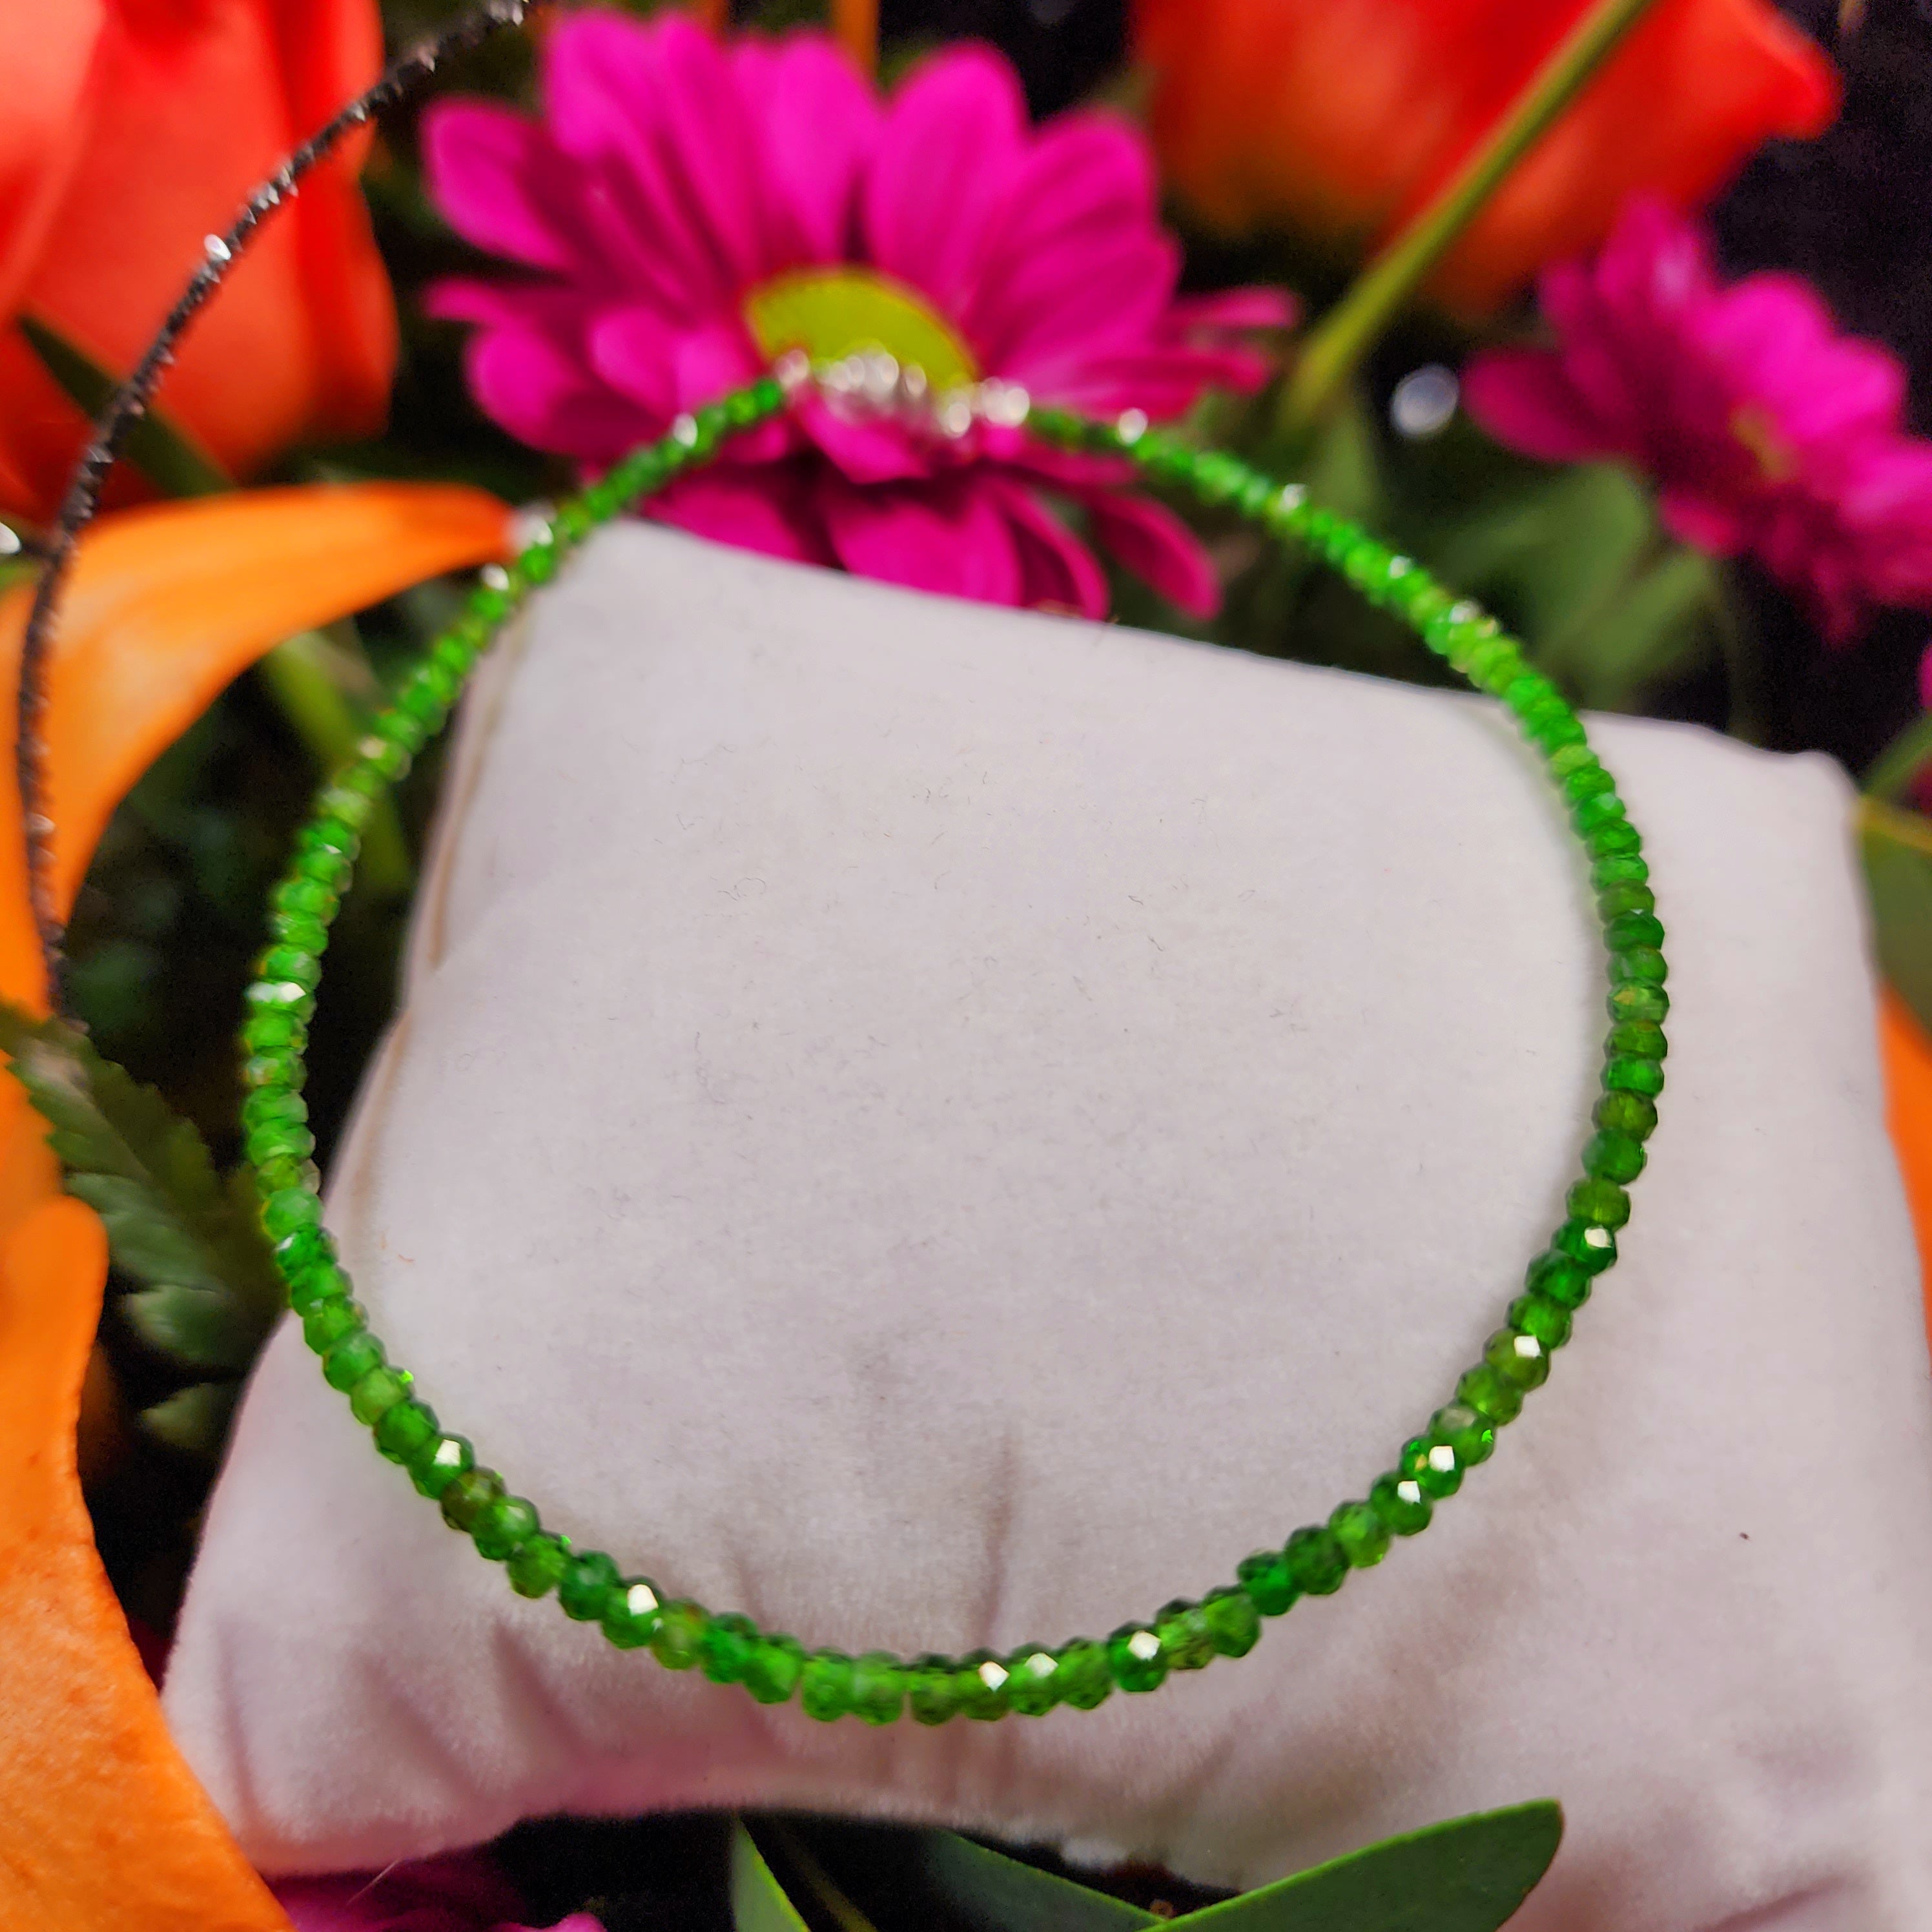 Chrome Diopside Micro Faceted Anklet .925 Silver for Compassion, Heart Healing and Forgiveness